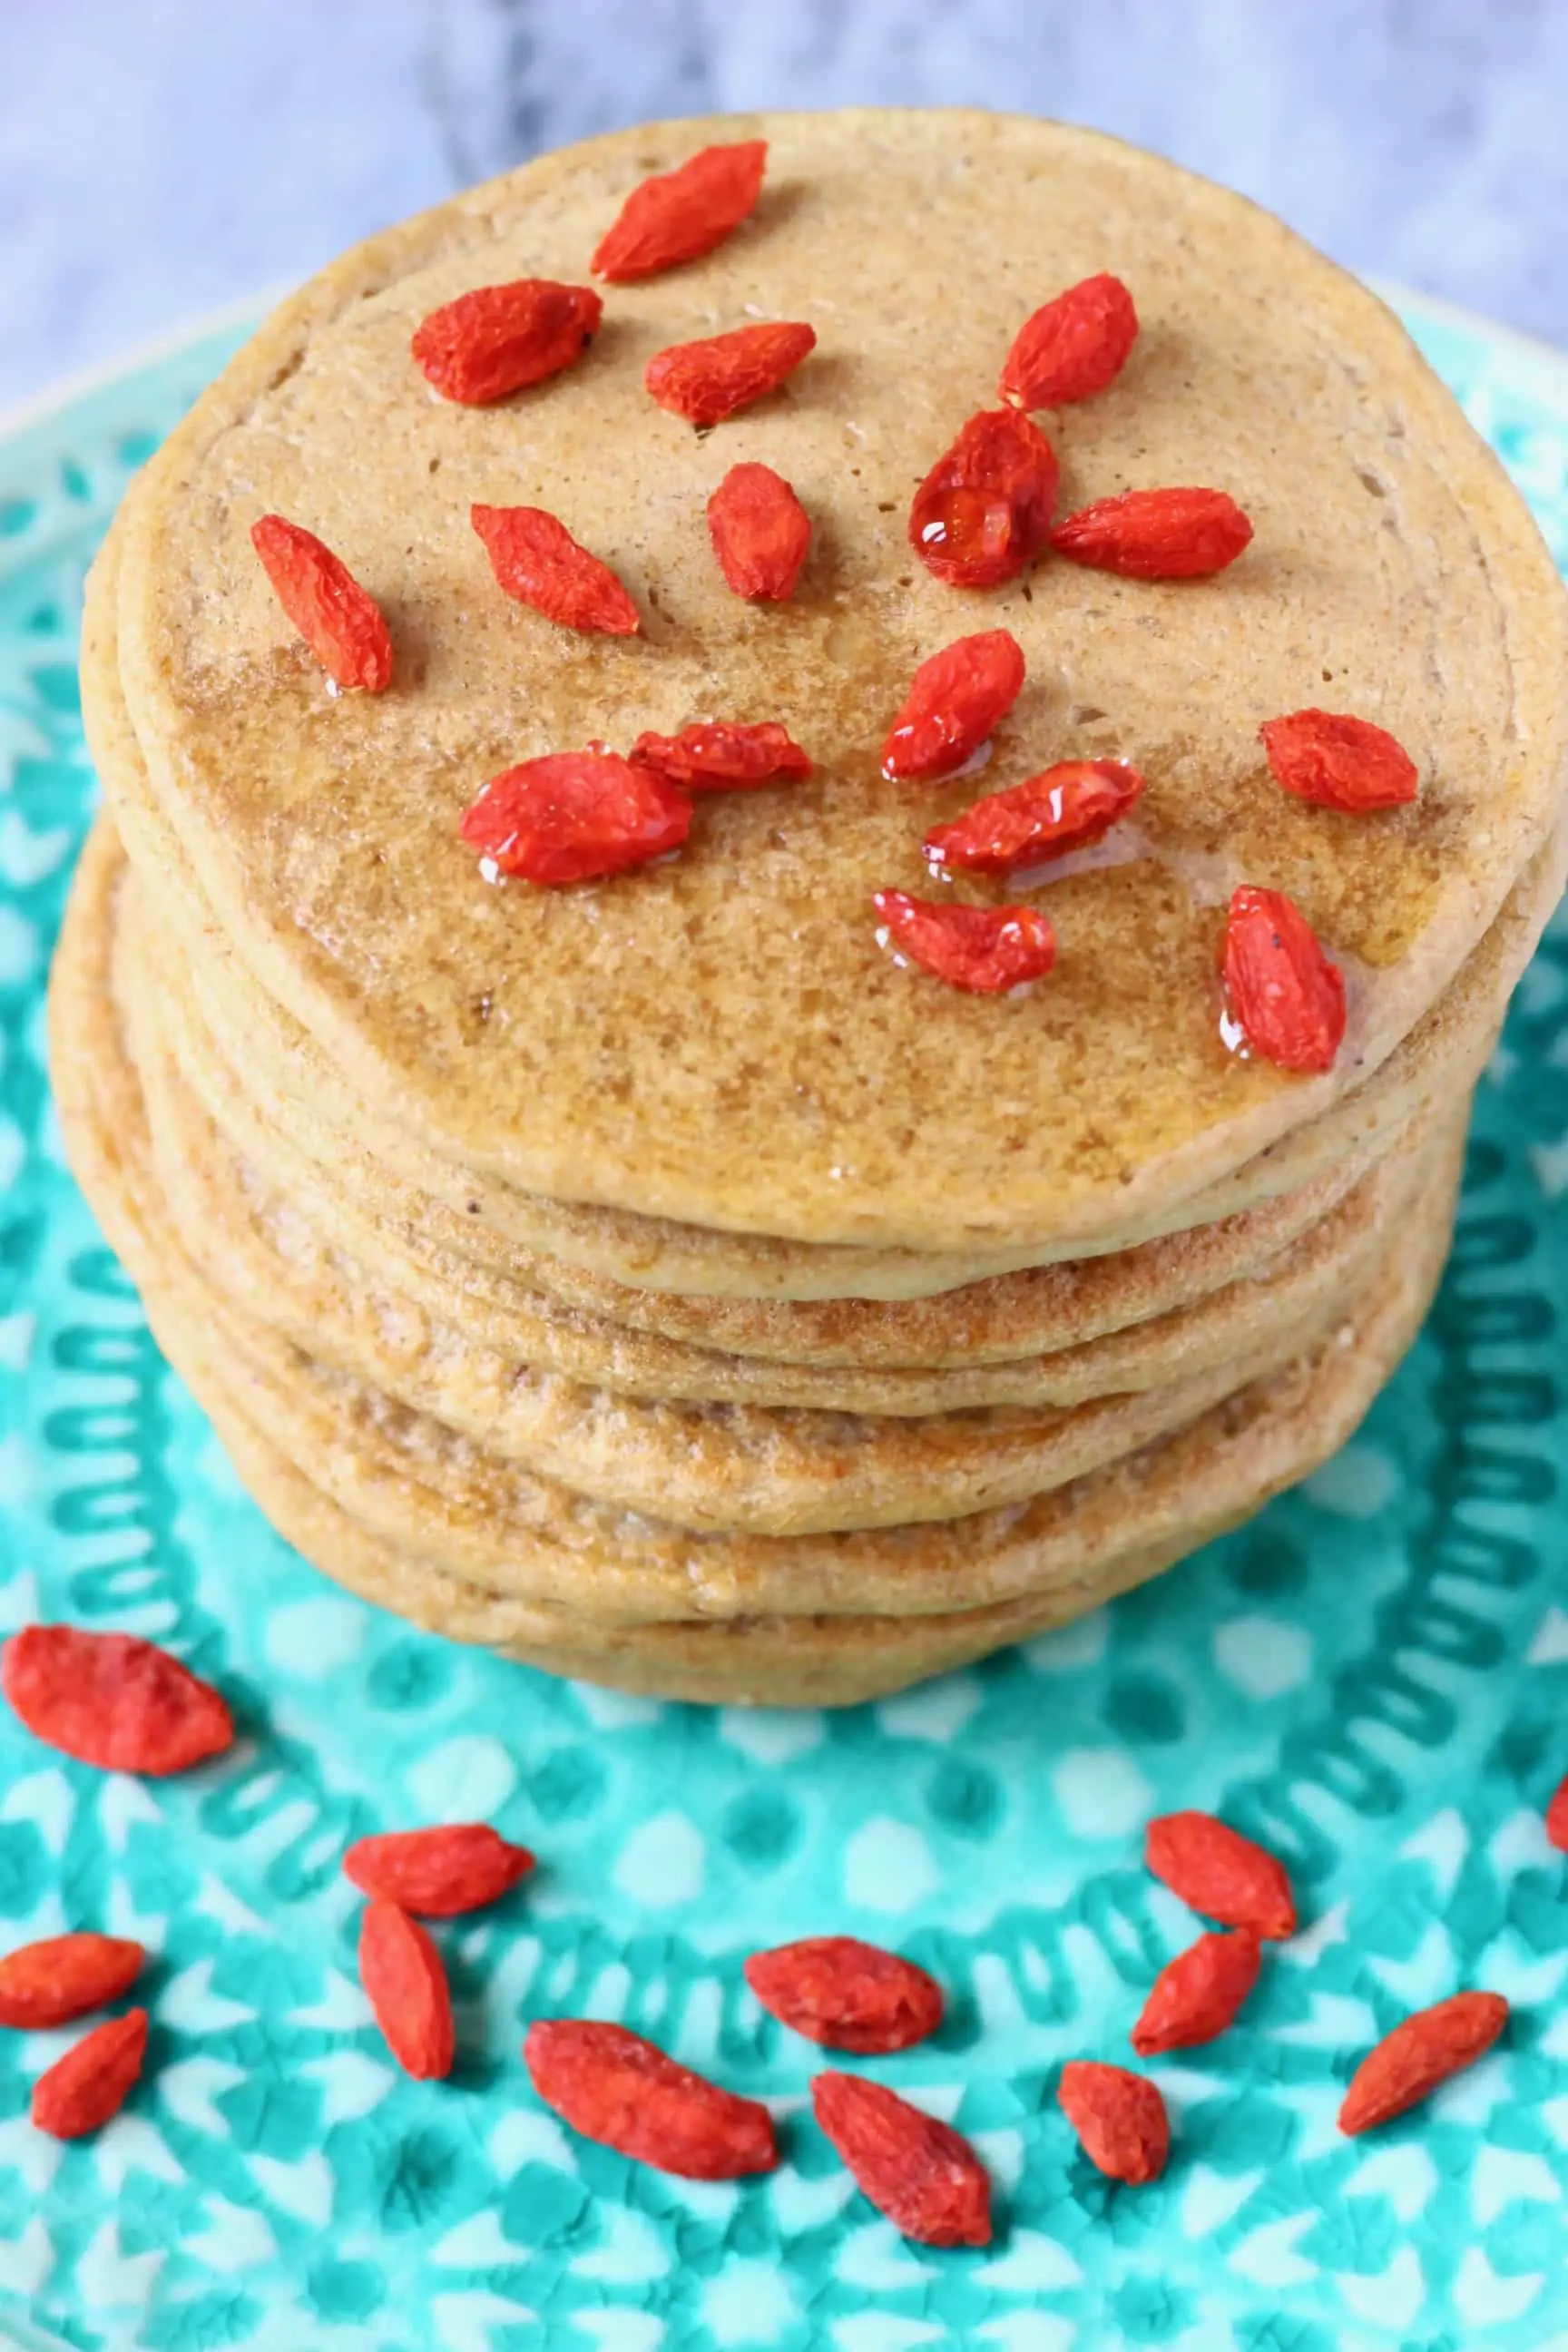 A stack of banana oatmeal pancakes decorated with goji berries on a green plate against a marble background